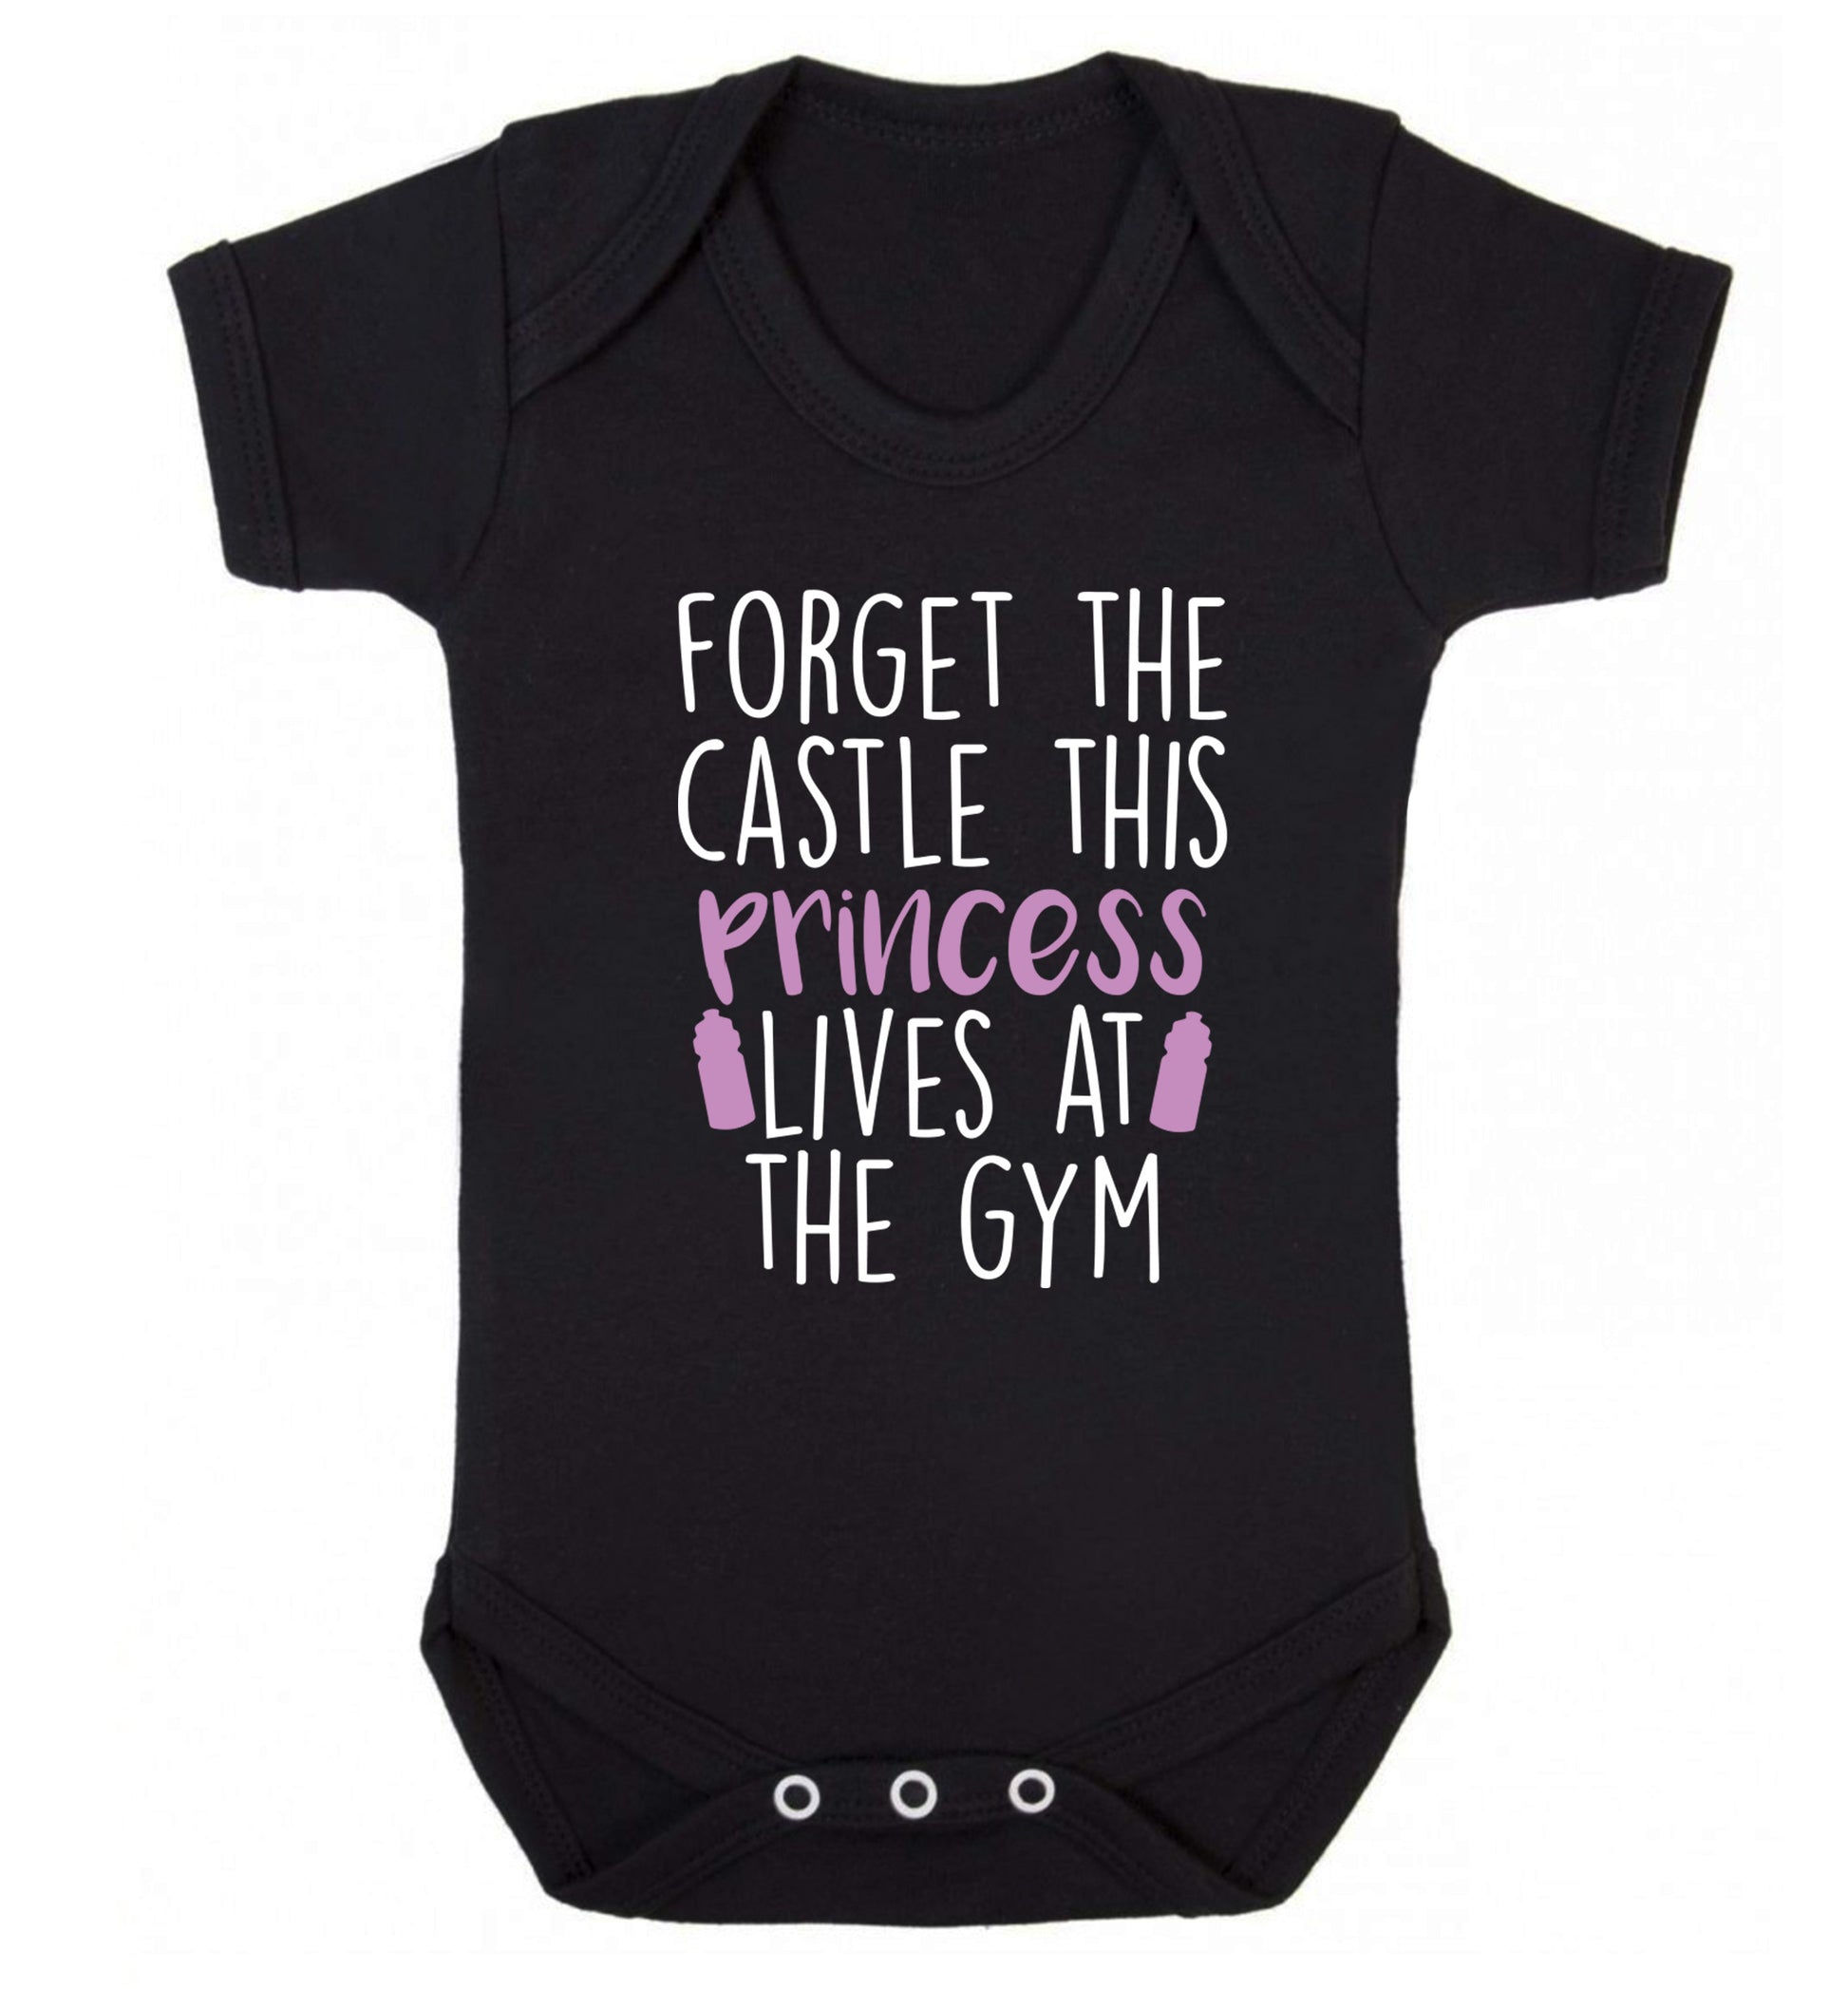 Forget the castle this princess lives at the gym Baby Vest black 18-24 months